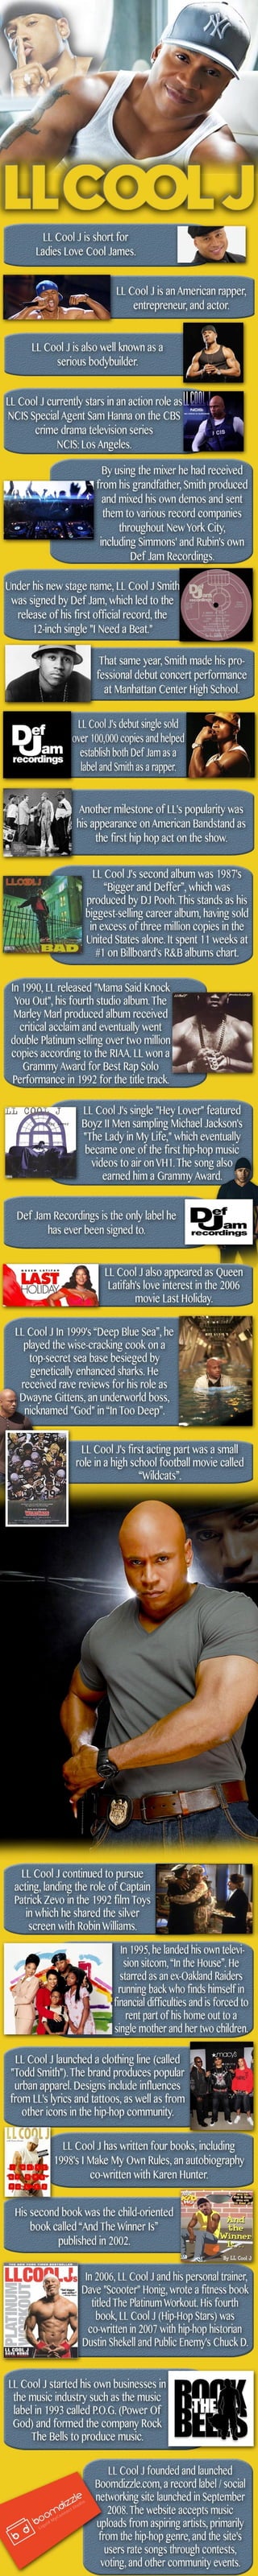 Ll cool j’s fascinating music and acting career